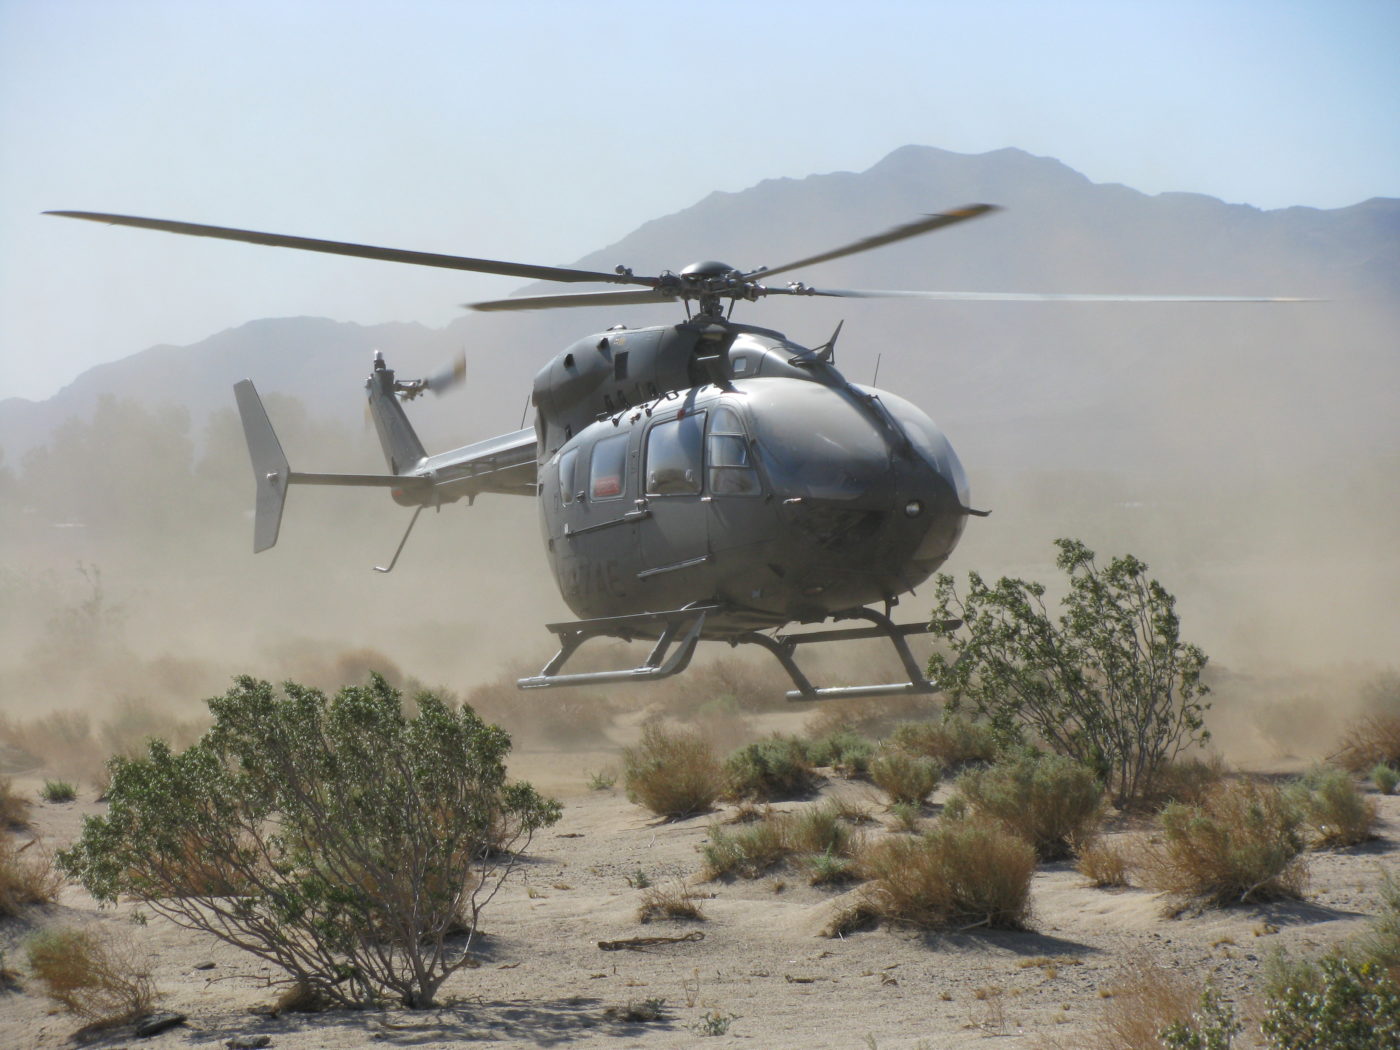 Airbus has delivered more than 420 Lakotas since the UH-72A was competitively selected in 2005.